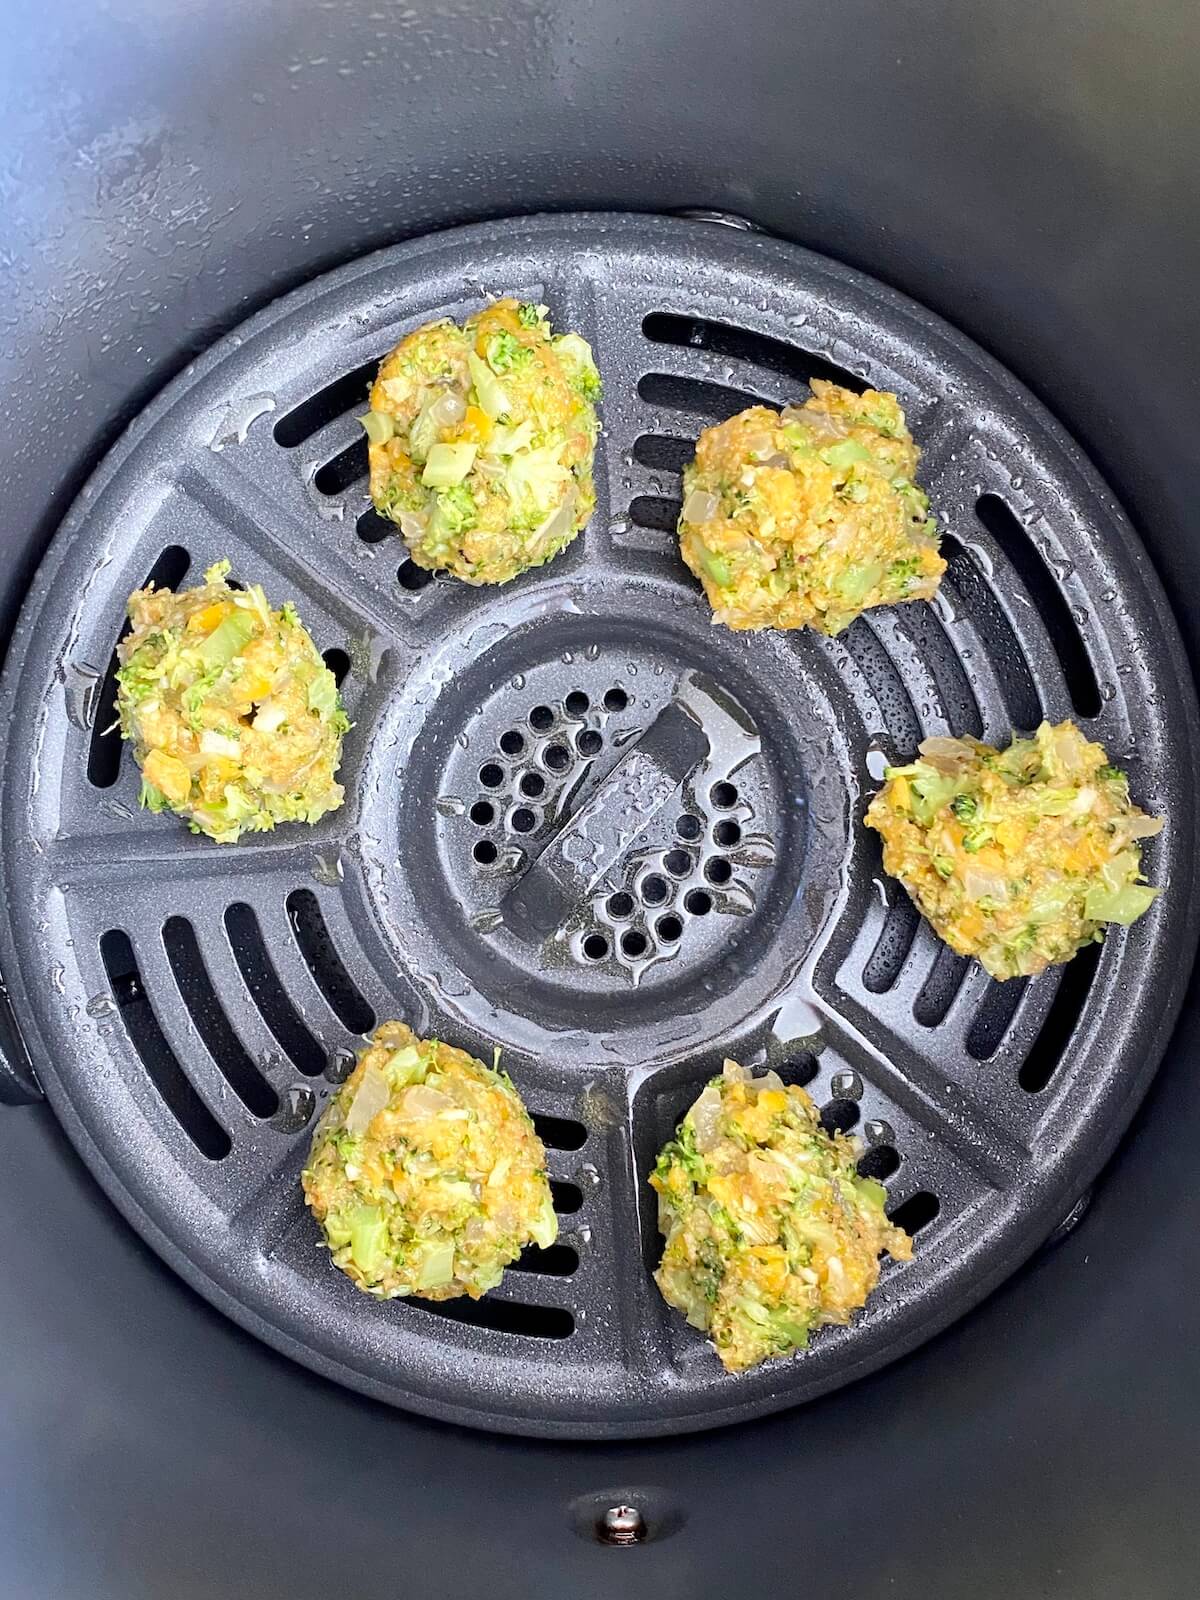 Six uncooked broccoli bites in the base of an air fryer basket.